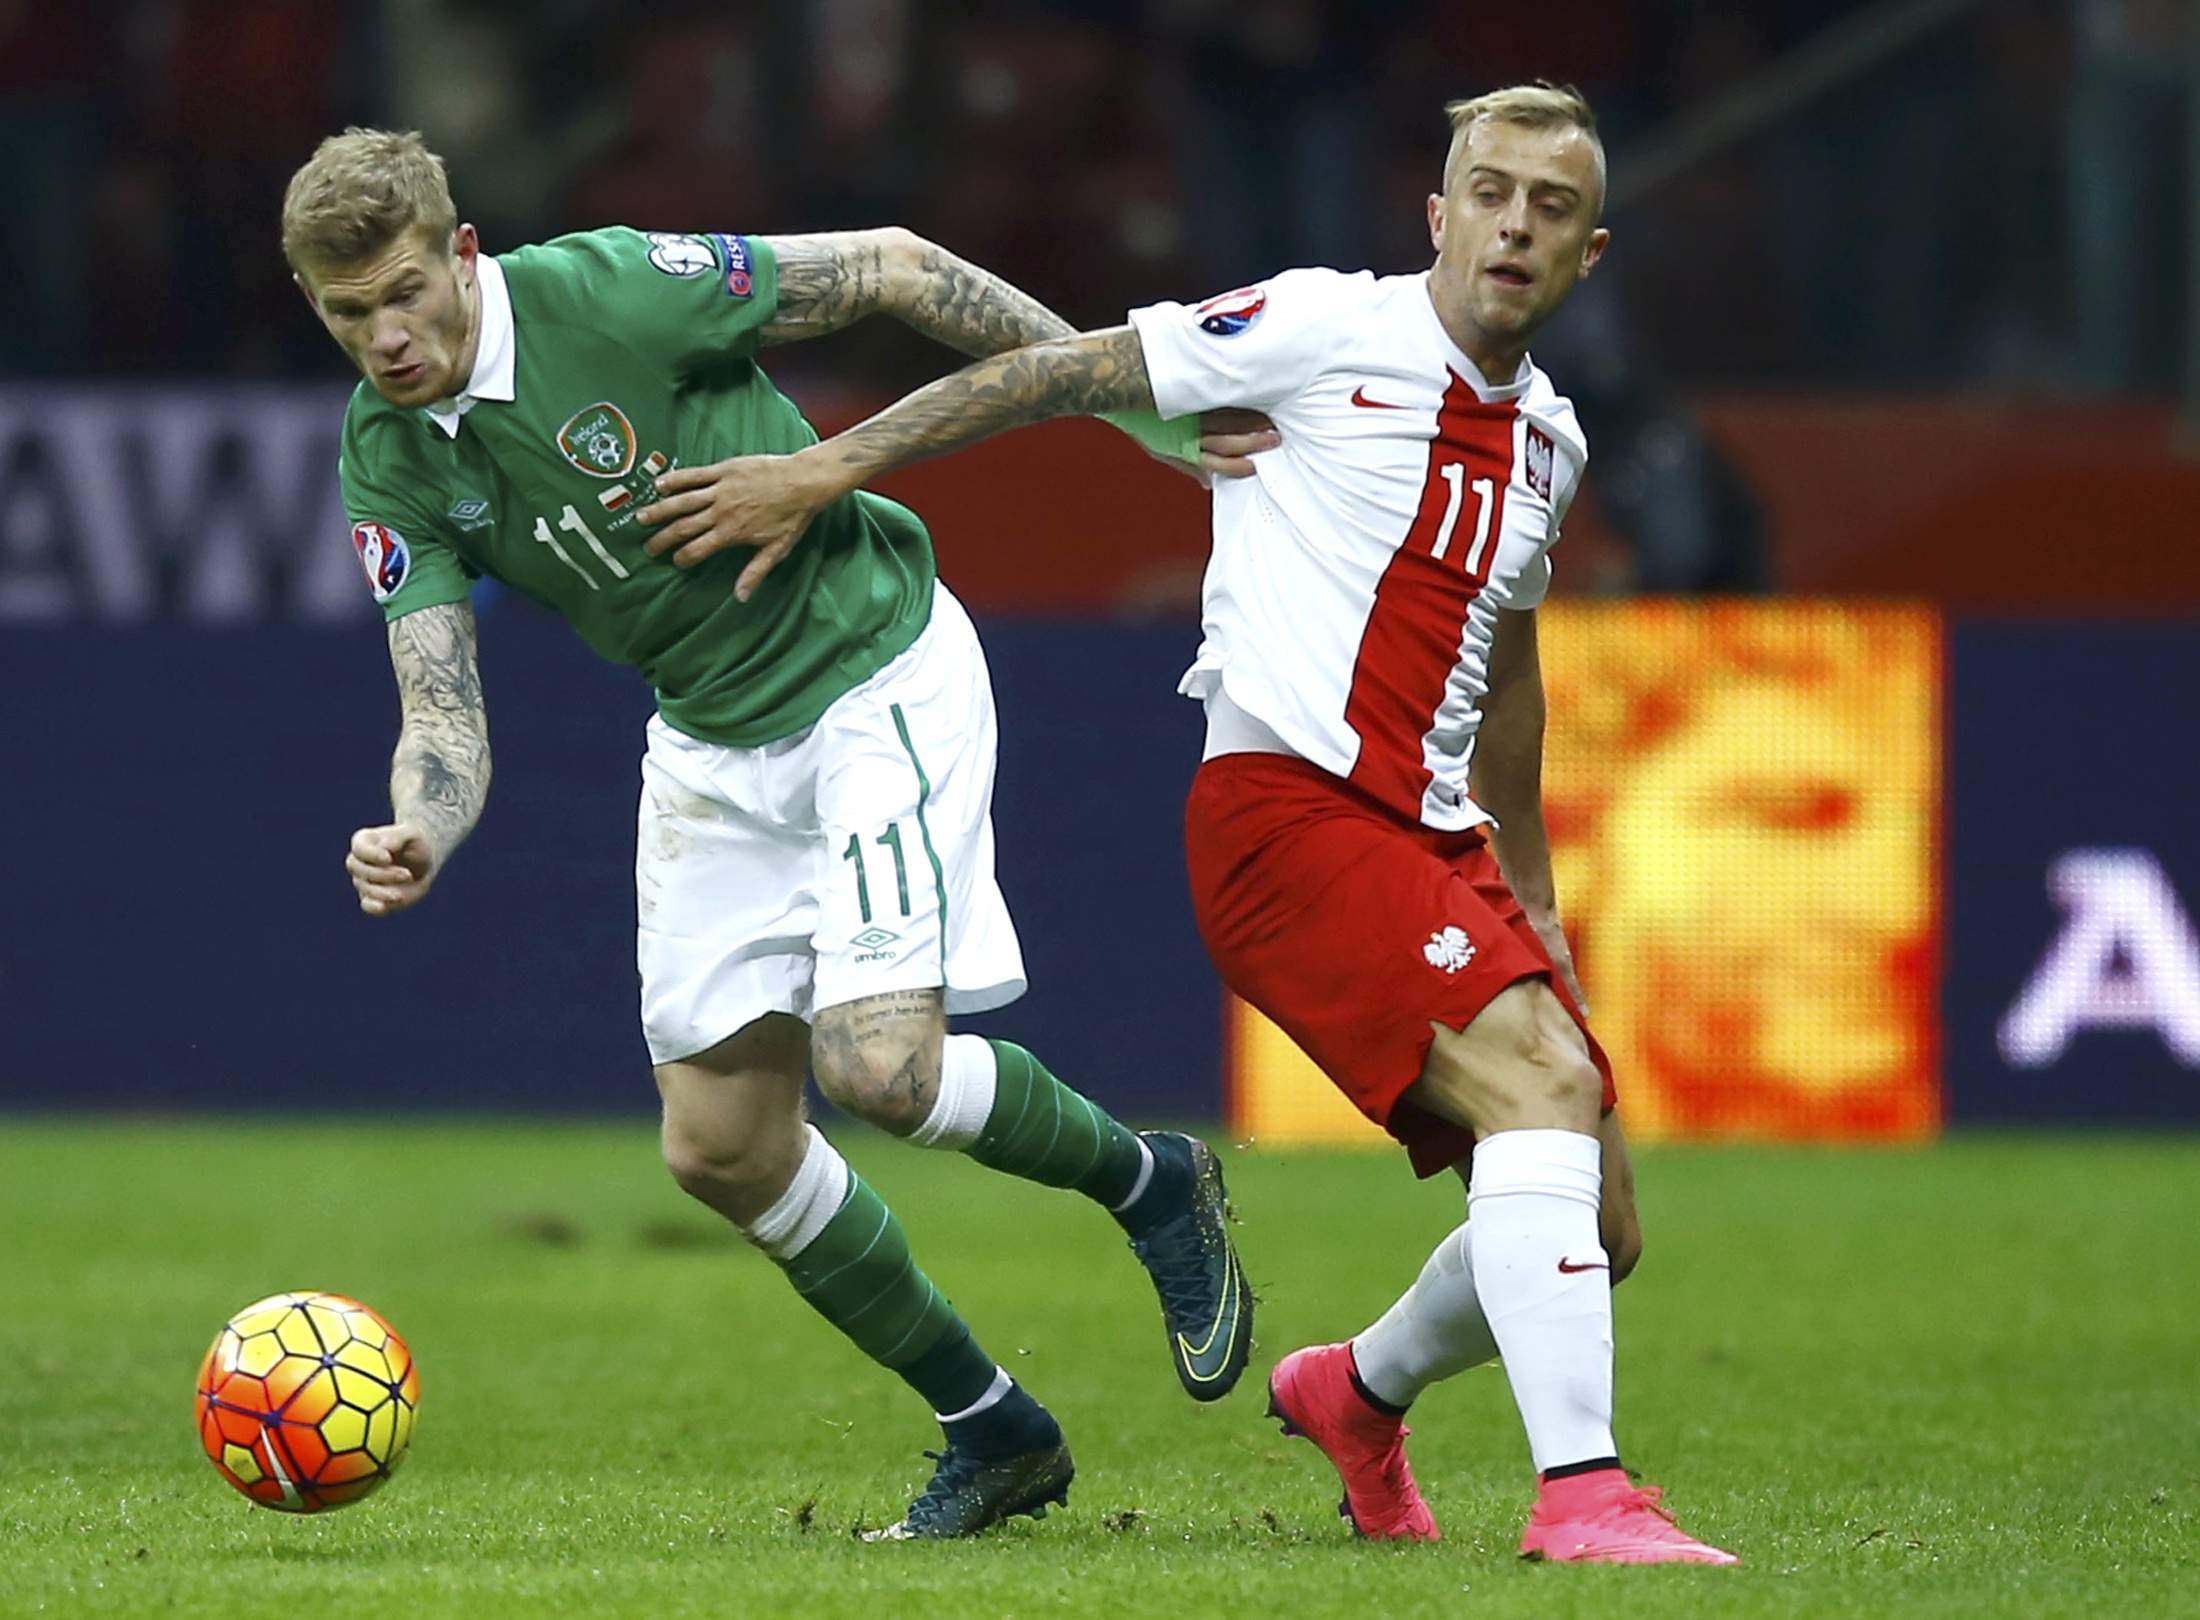 Poland's Kamil Grosicki challenges Republic of Ireland's James McClean (L) during their Euro 2016 group D qualification soccer match in Warsaw, Poland October 11, 2015. REUTERS/Kacper Pempel